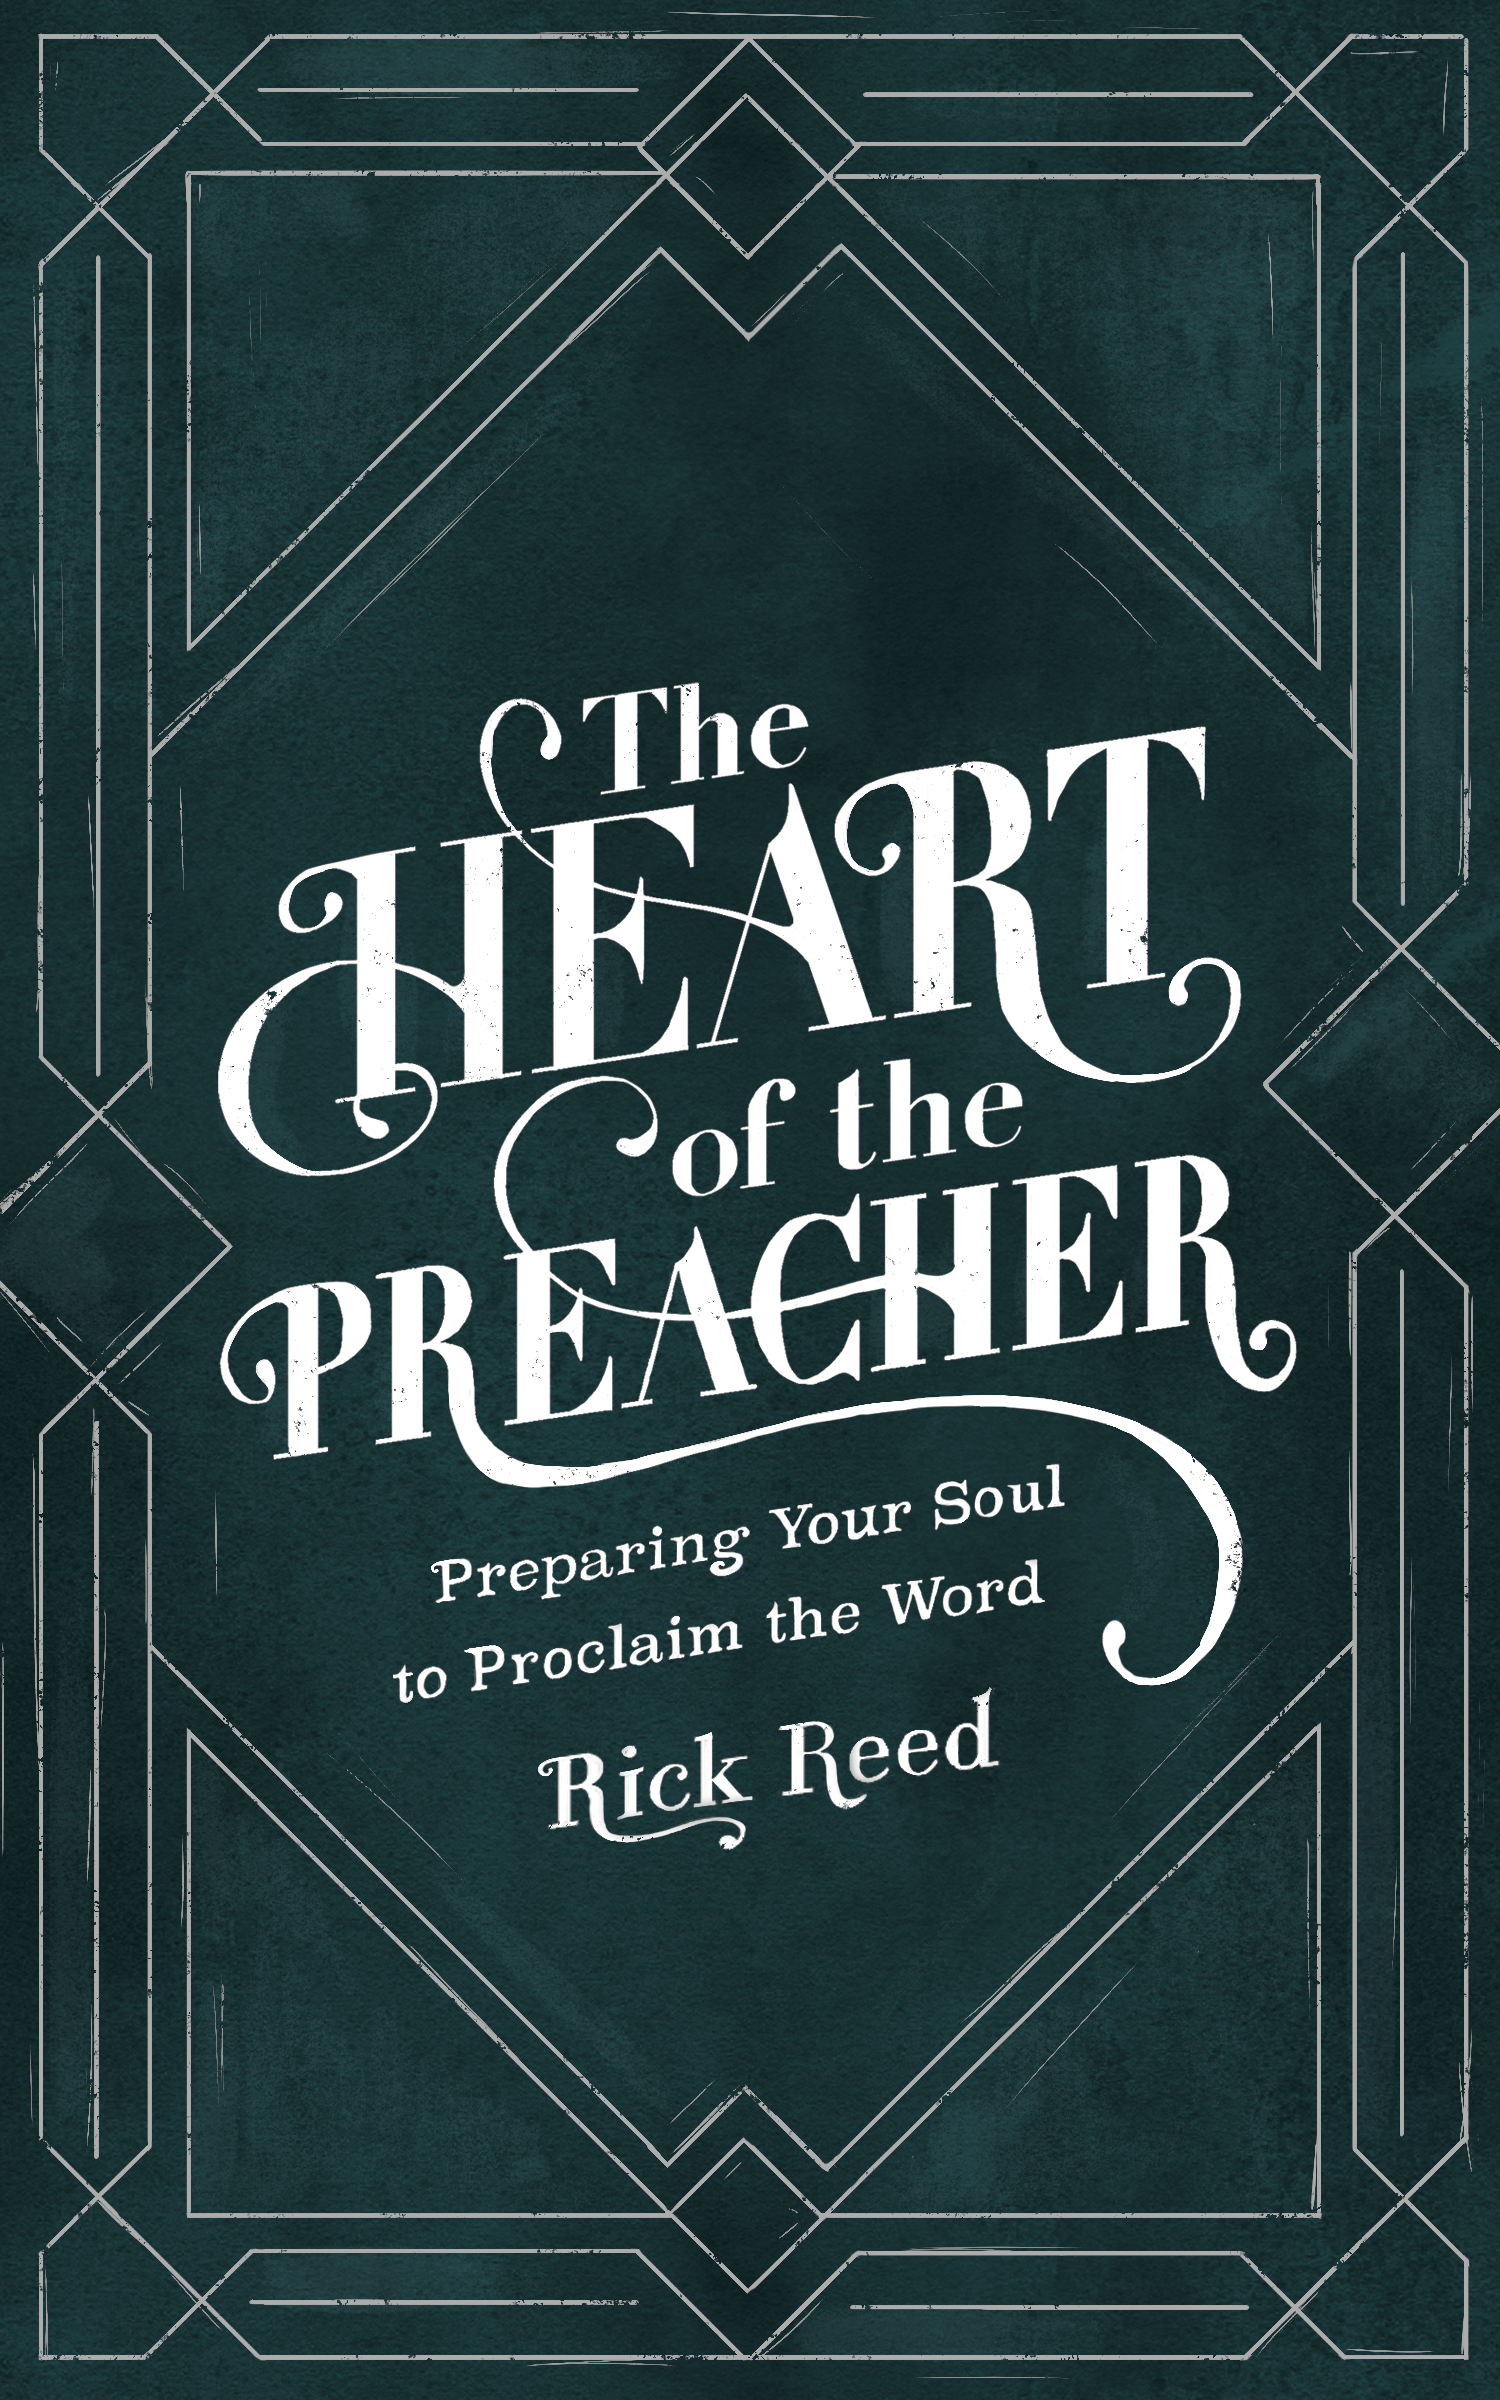 The Heart of the Preacher Preparing Your Soul to Proclaim the Word - image 1